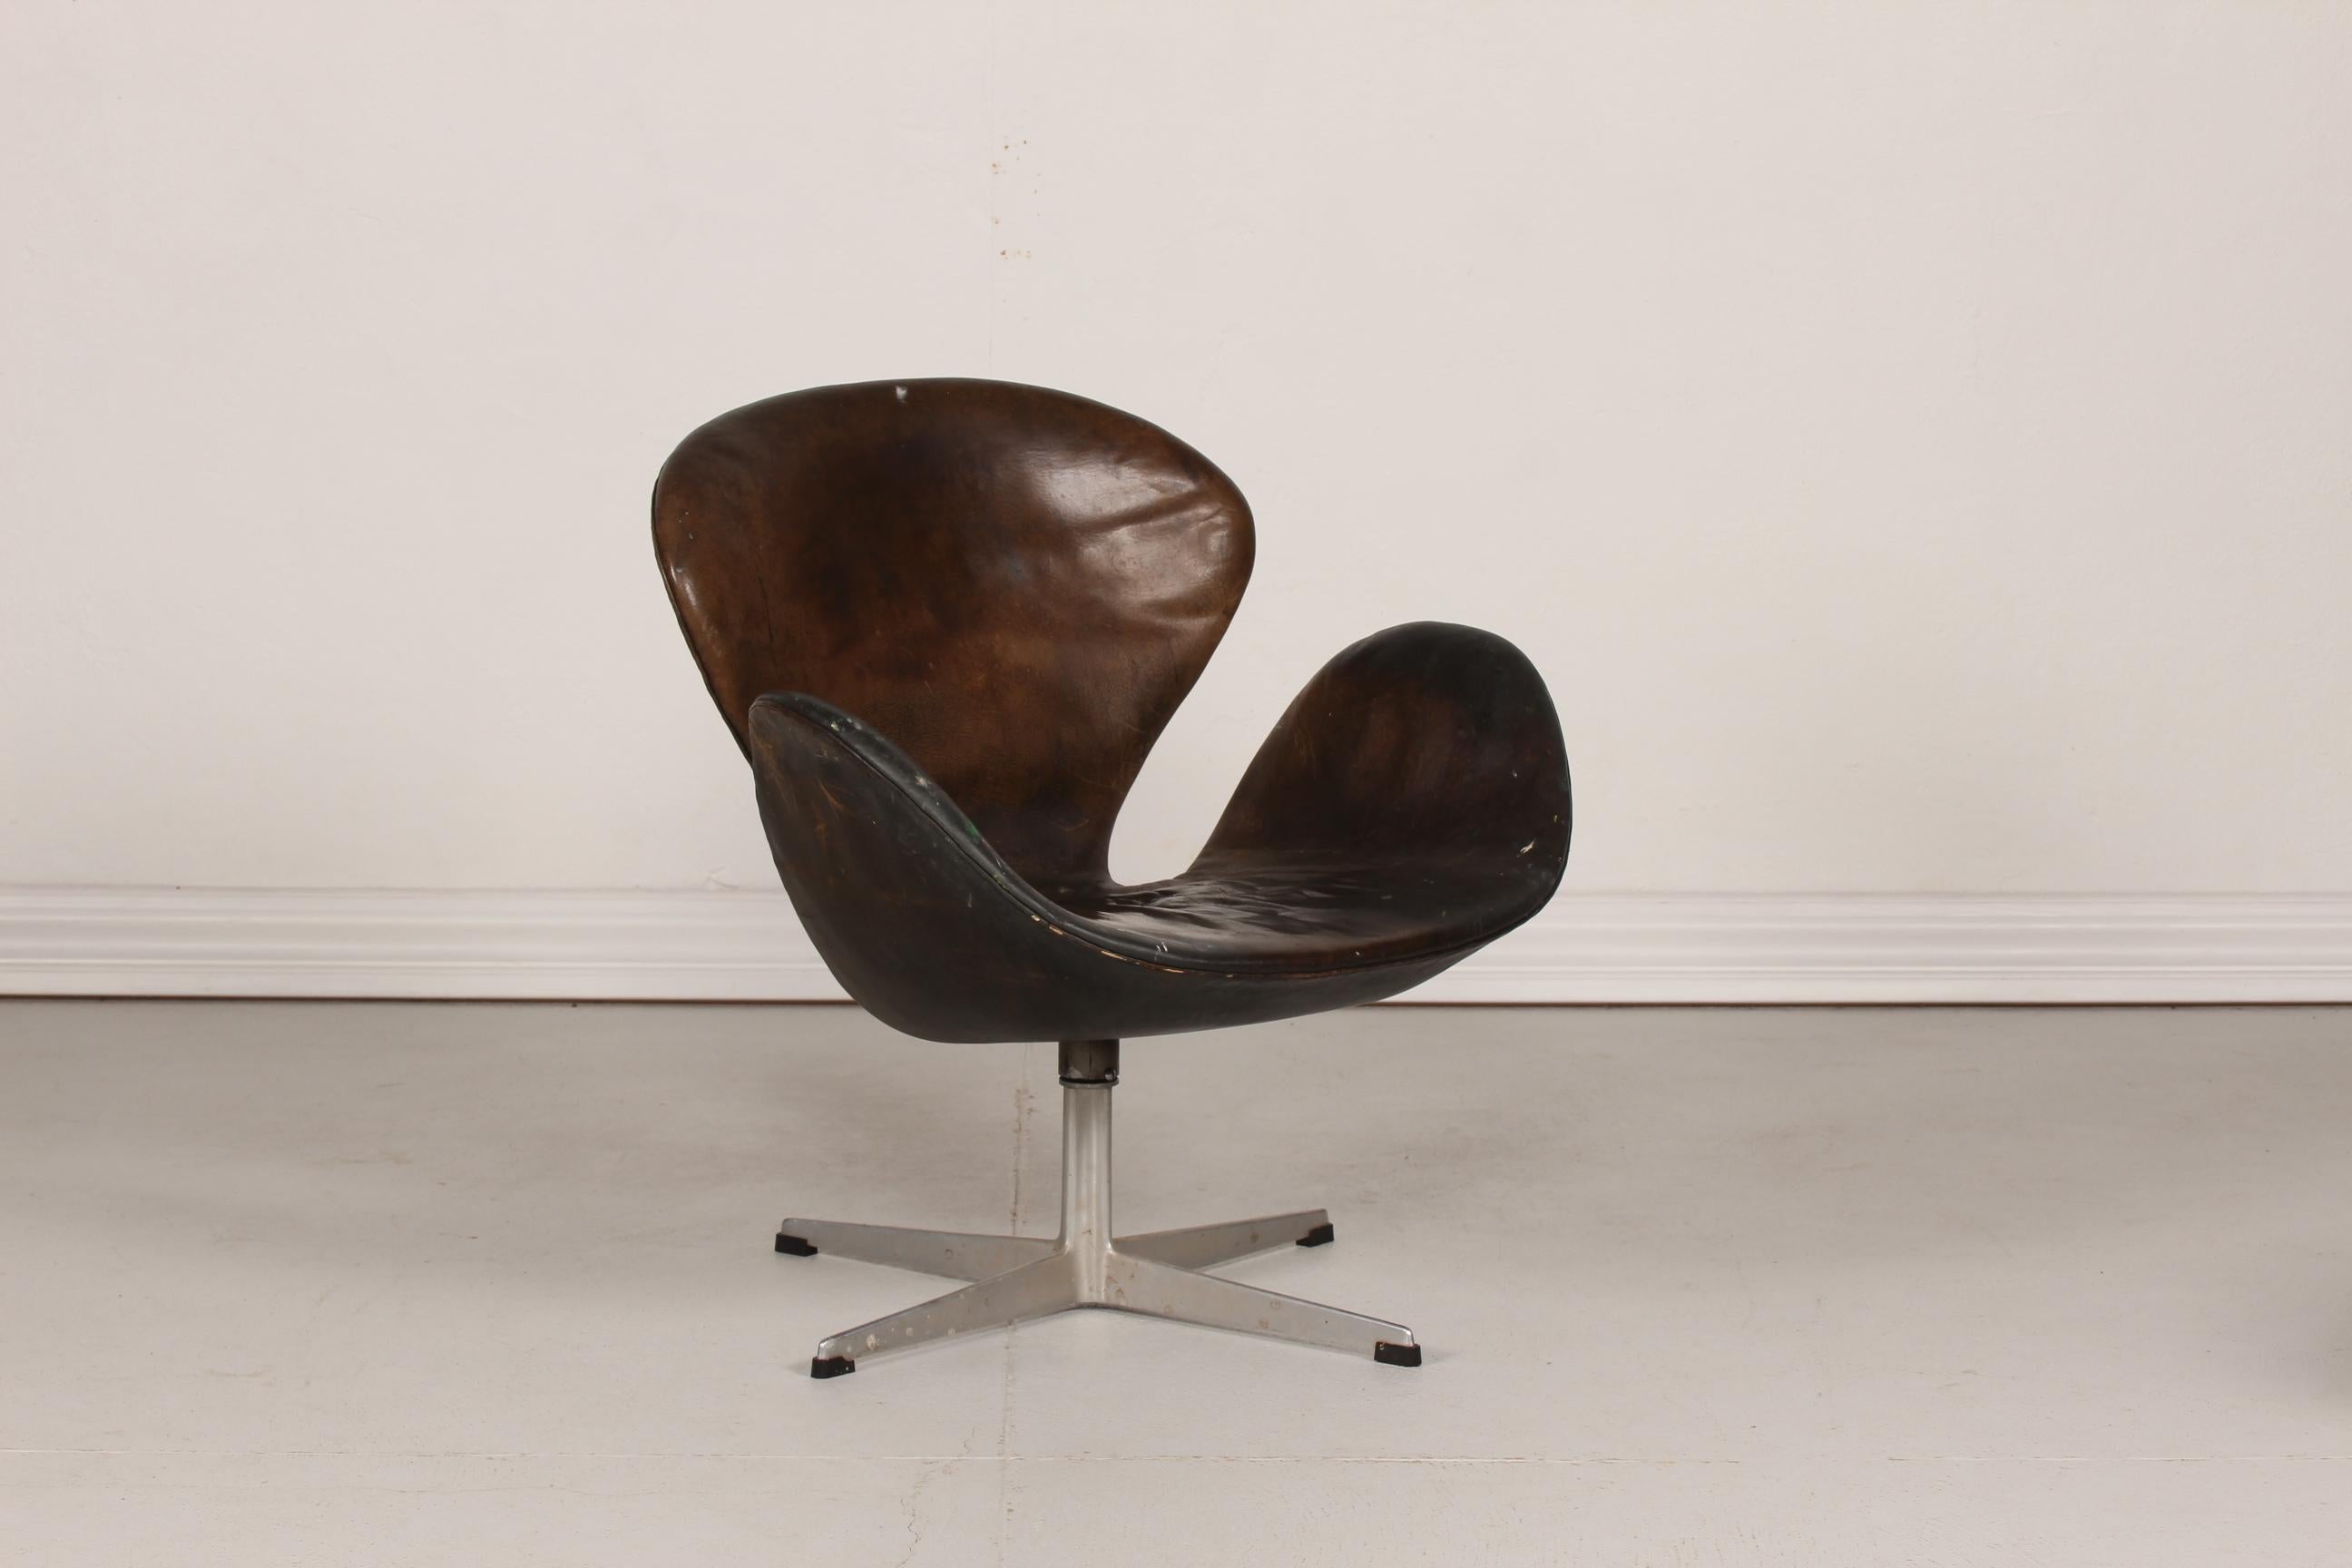 Aluminum Original 1960s Arne Jacobsen Black Leather Swan Chair 3320 with Heavy Patina